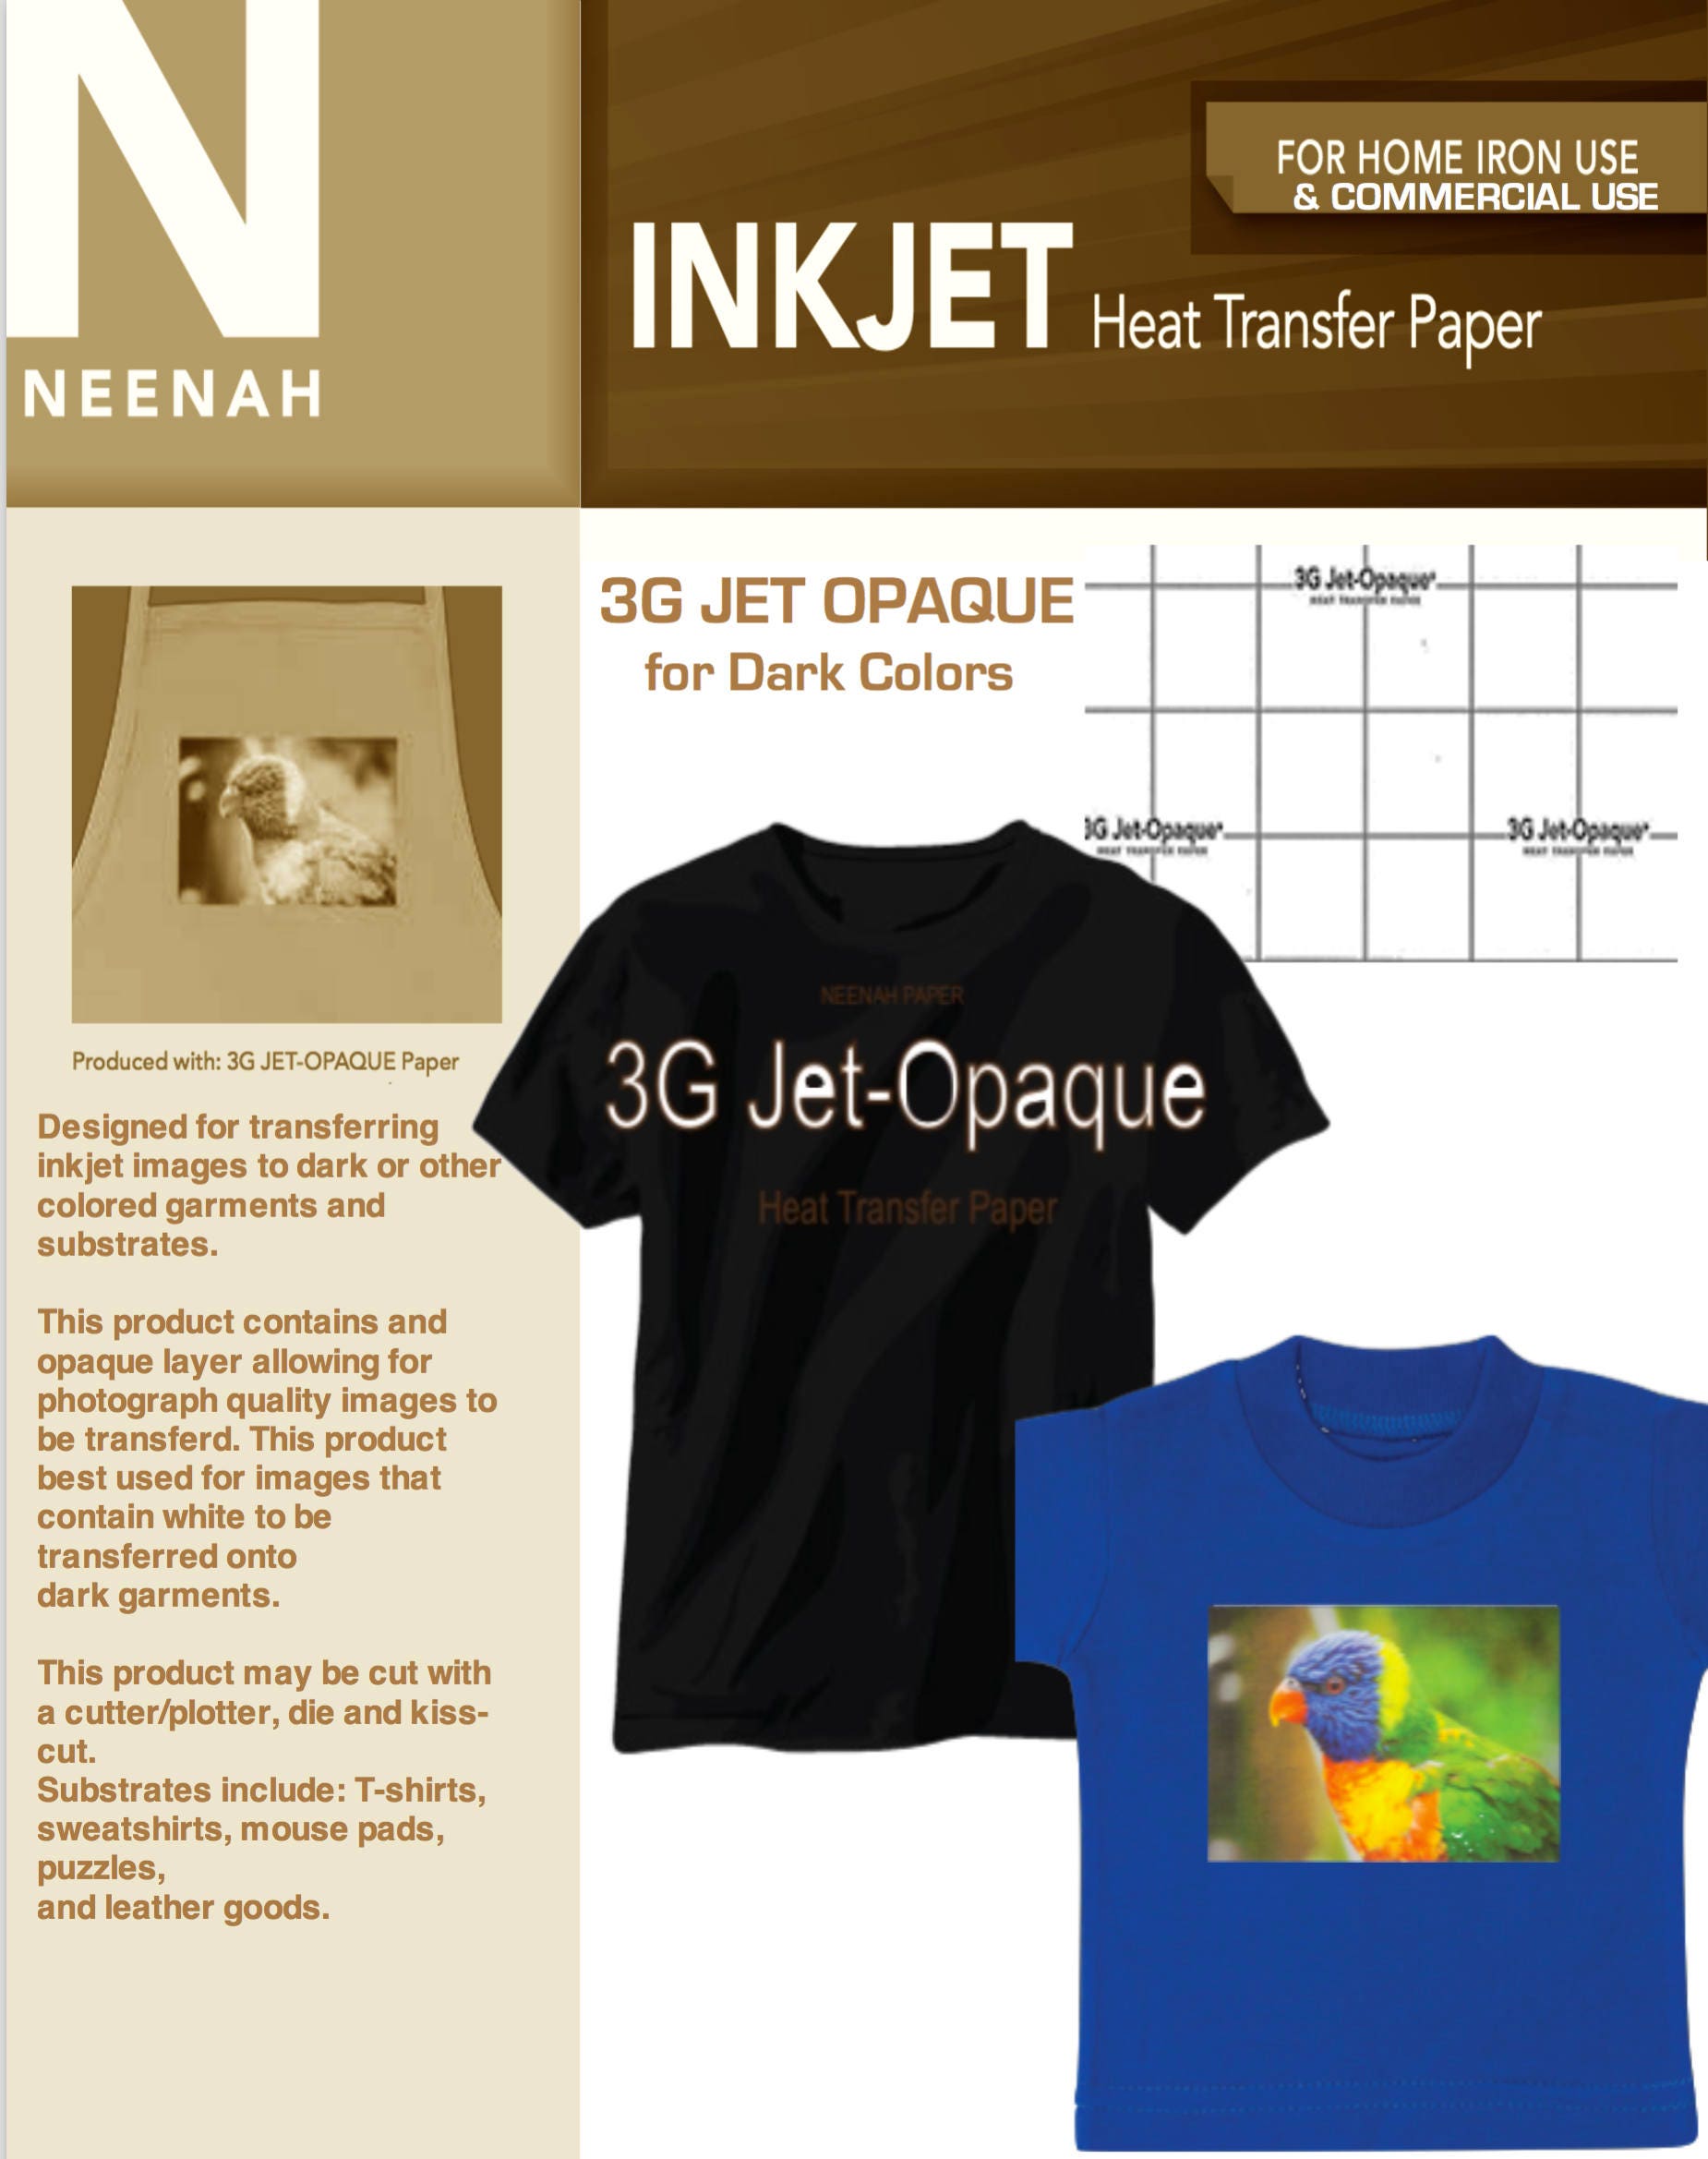 Heat Transfer Paper Sample Pack 5 Sheets of 3G Jet Opaque for Dark